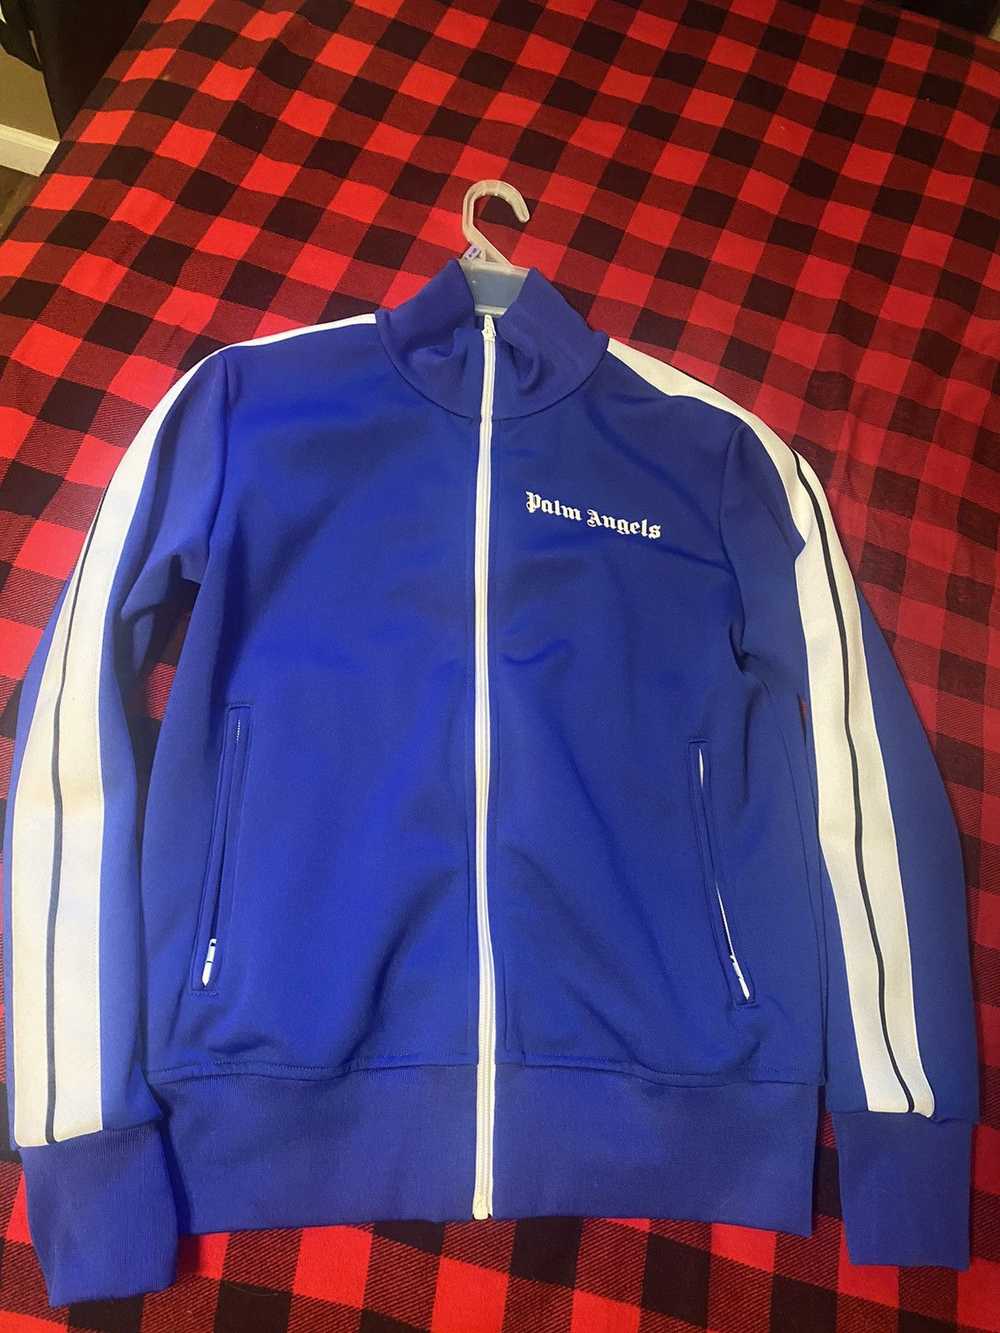 Palm Angels Palm Angels Track Jacket Size Small - image 1